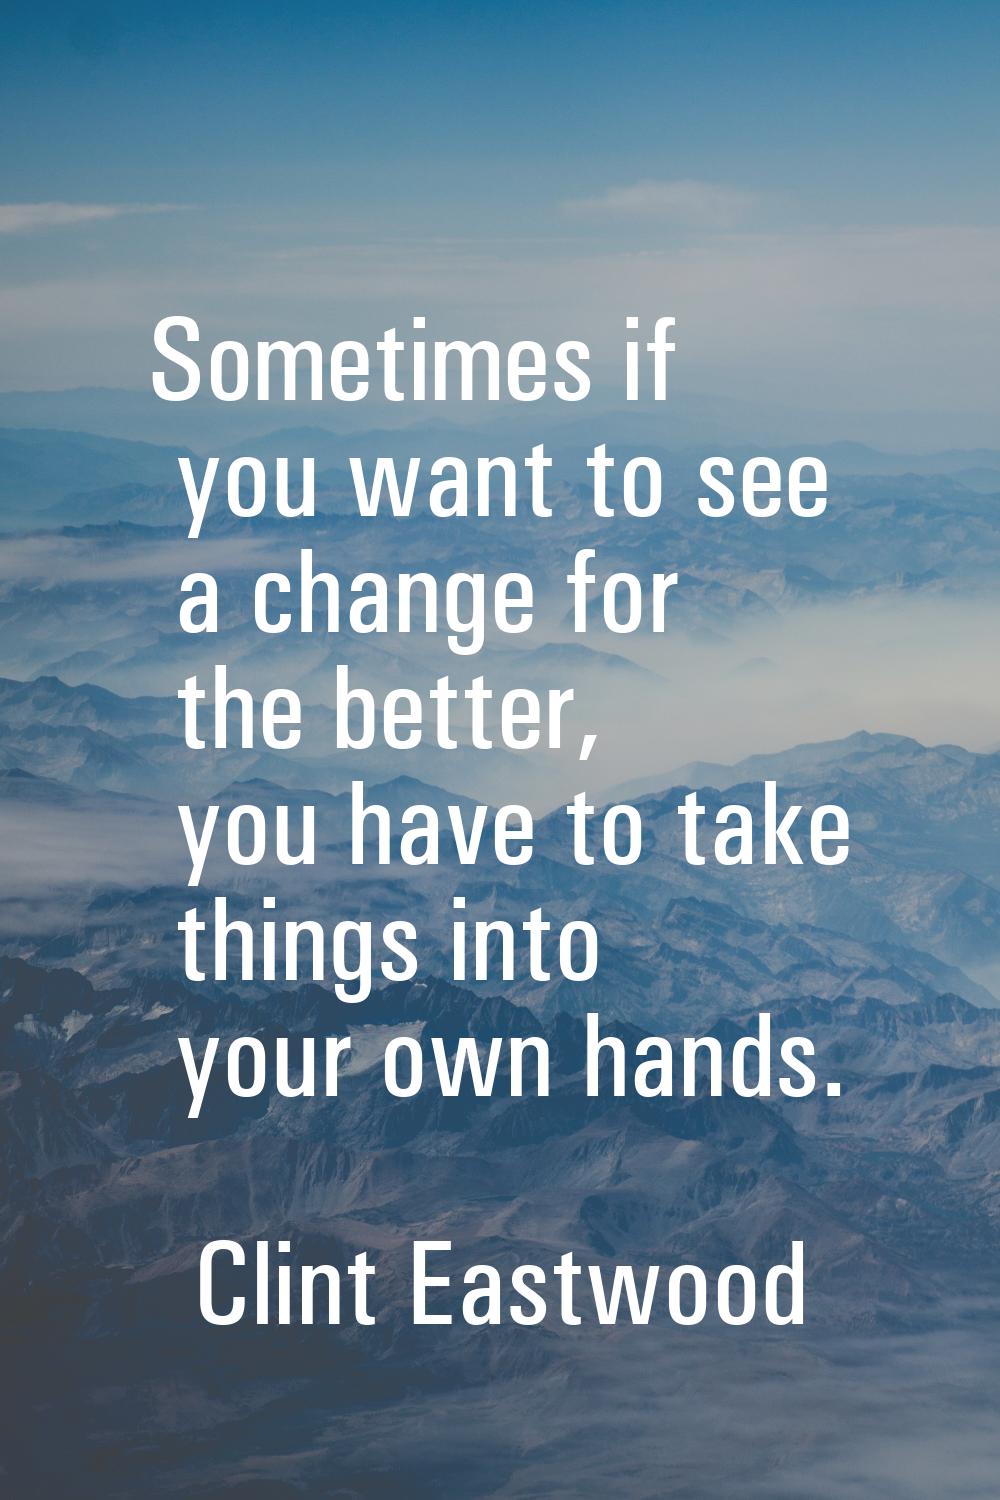 Sometimes if you want to see a change for the better, you have to take things into your own hands.